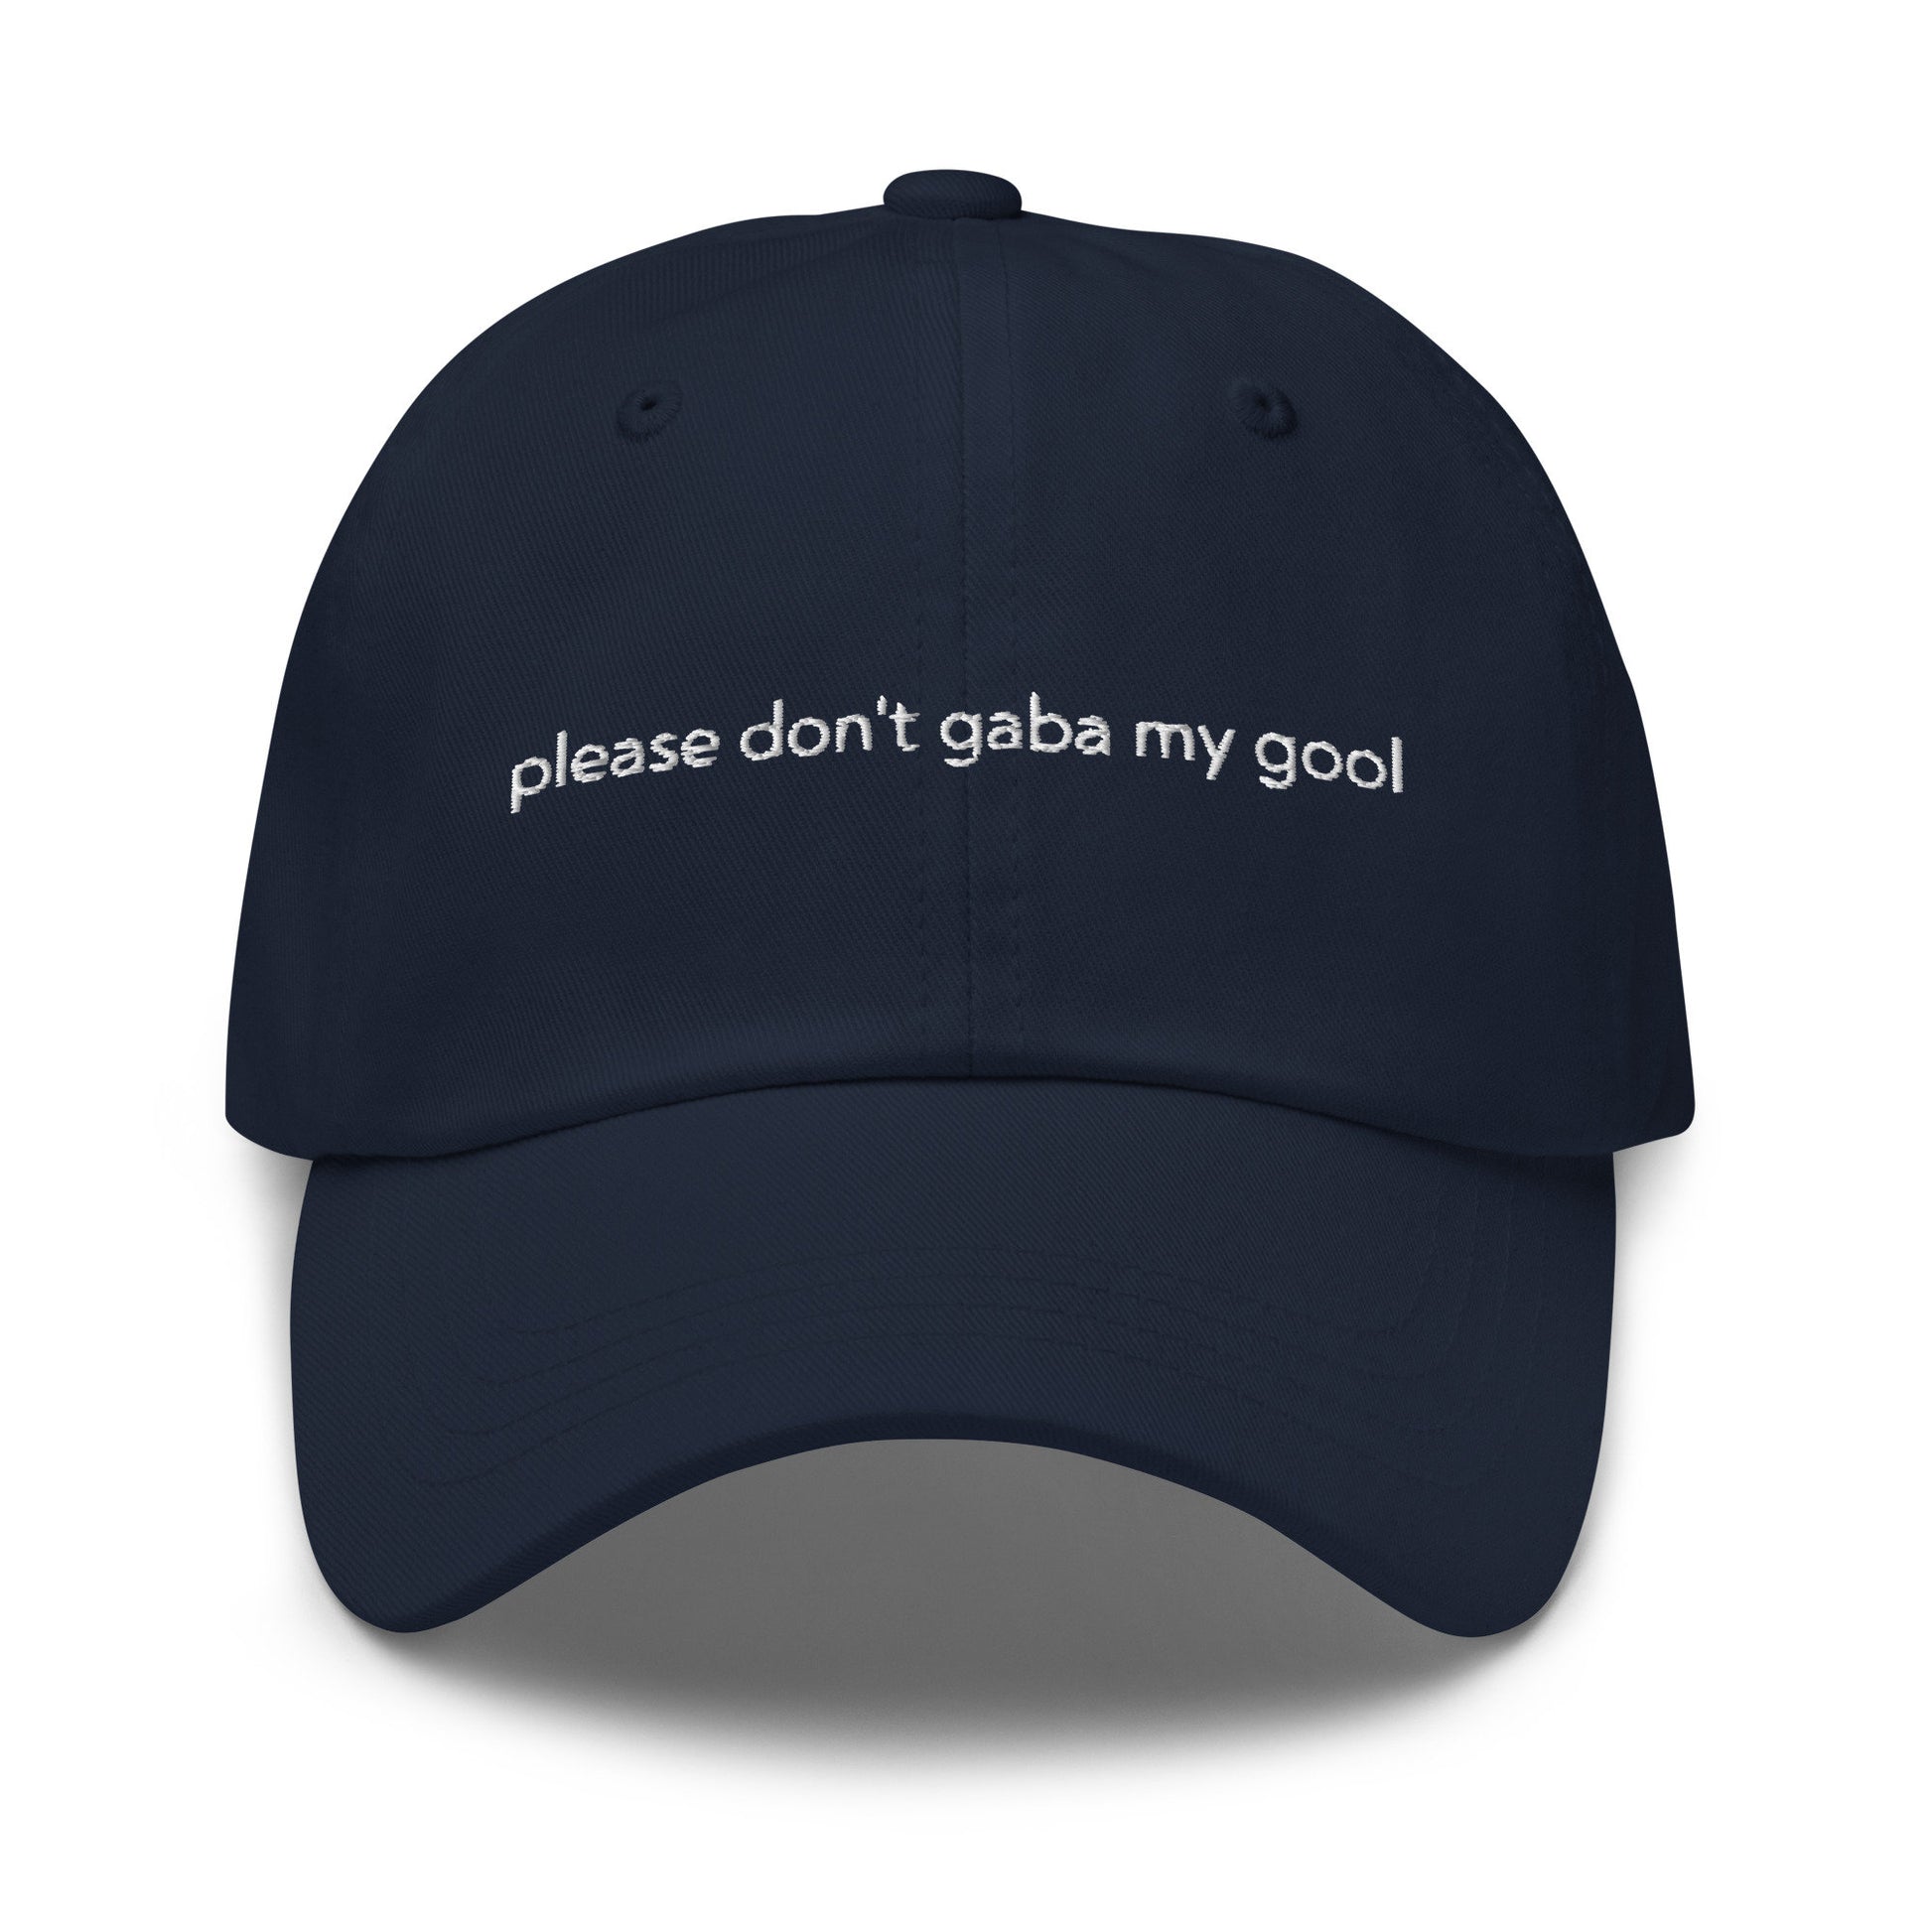 Gabagool Hat - Funny italian American Gift - Multiple Colors - Cotton Embroidered Cap